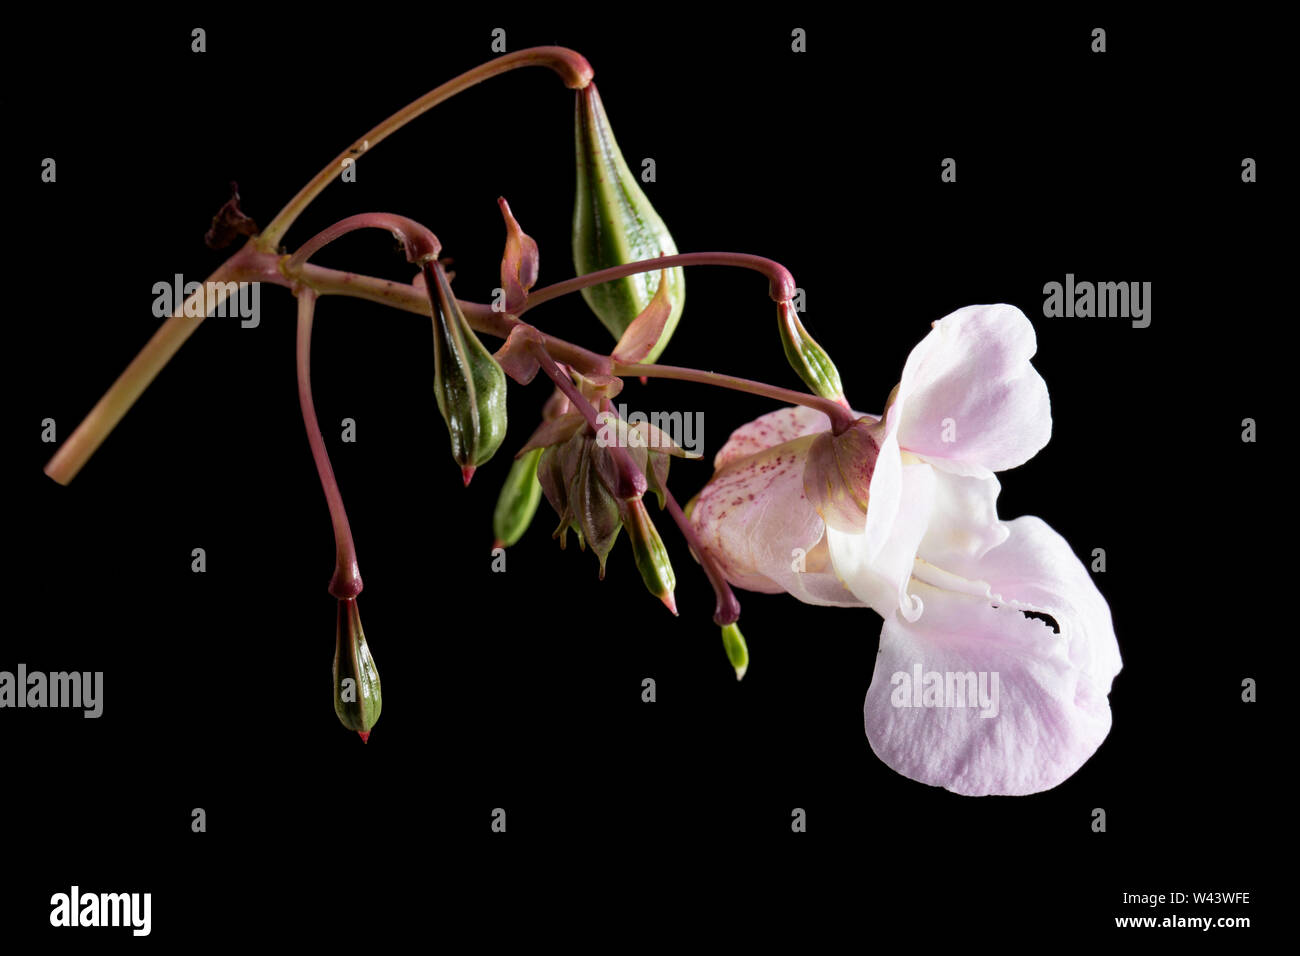 A photograph of a Himalayan Balsam flower Impatiens glandulifera, and its green, developing seed pods. The pods are capable of firing the seeds severa Stock Photo